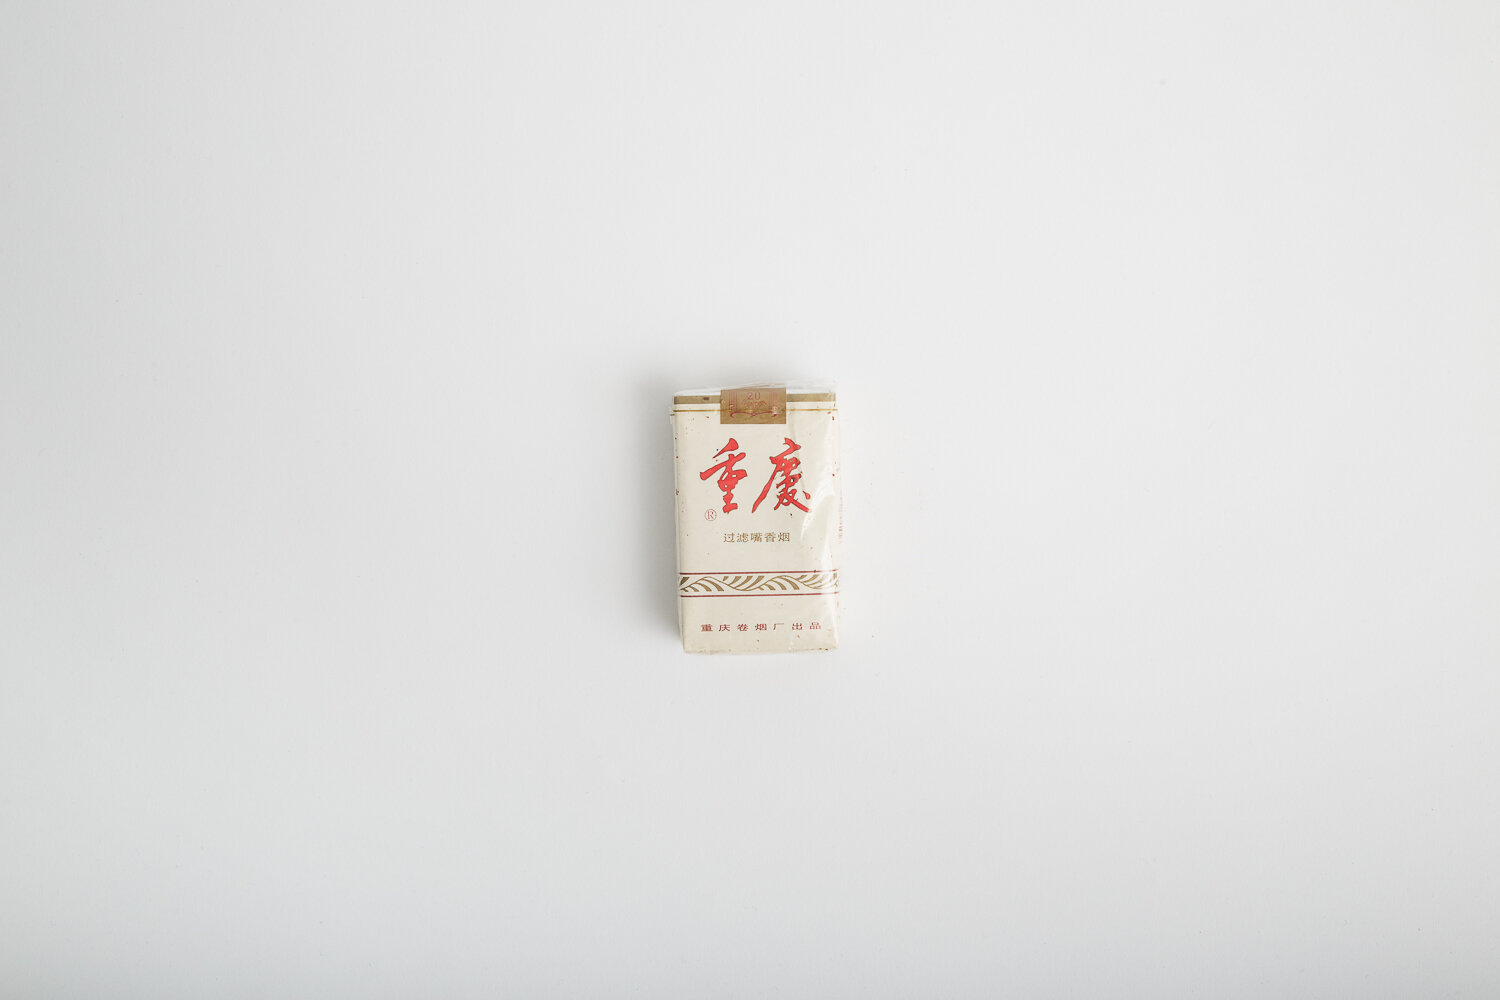 Chinese Cigarettes.